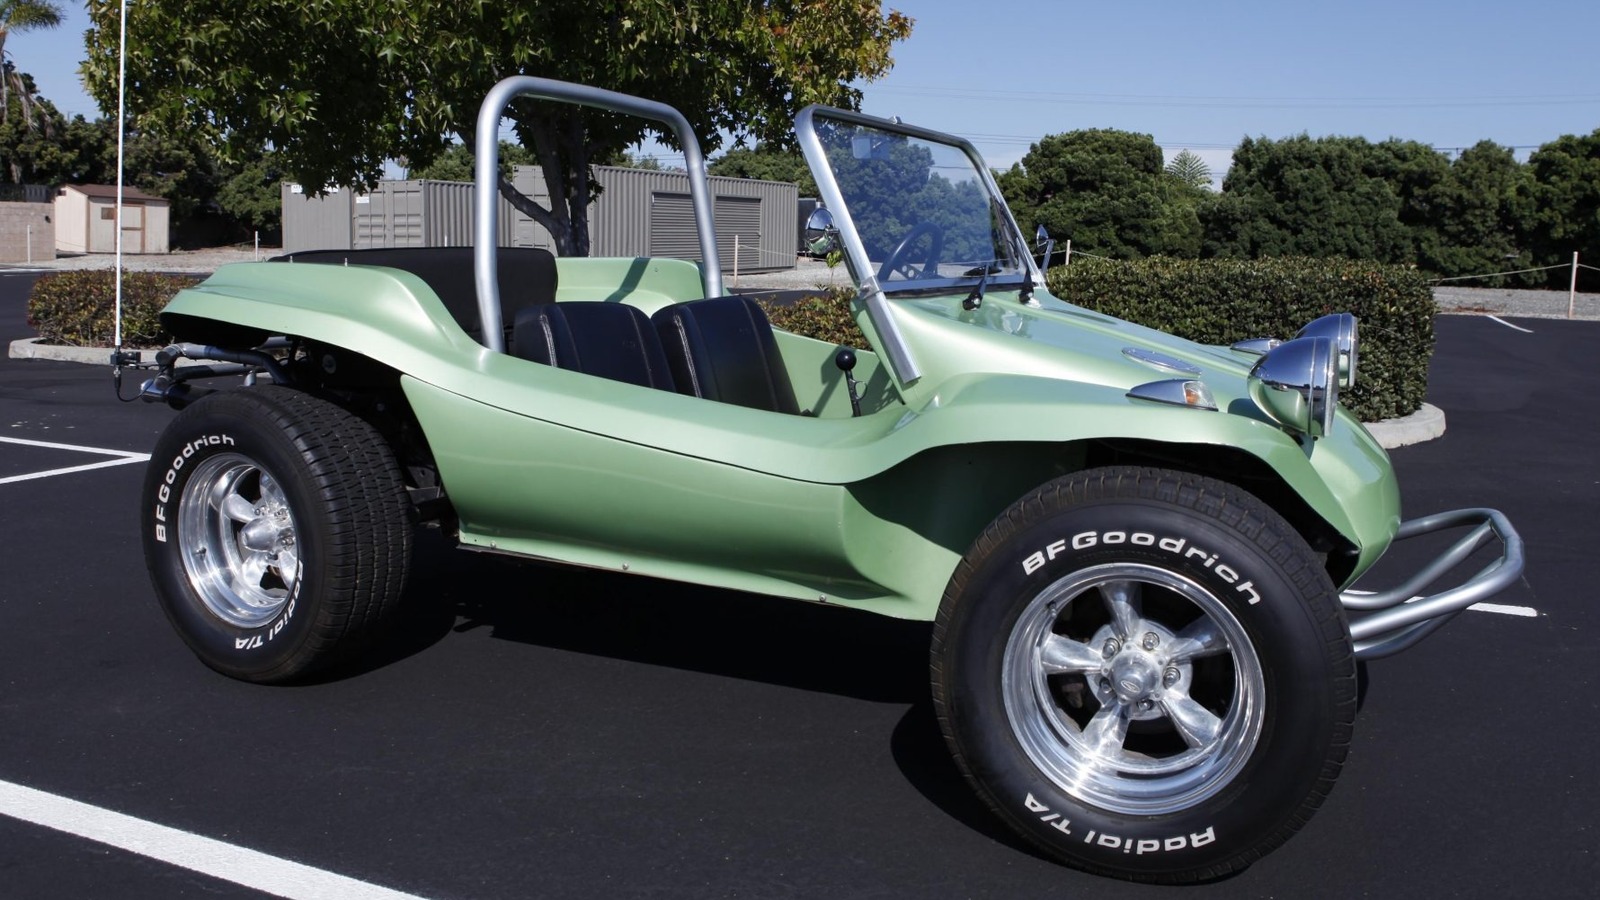 5 Of The Most Desirable Dune Buggy Kit Cars For Summer Driving – SlashGear